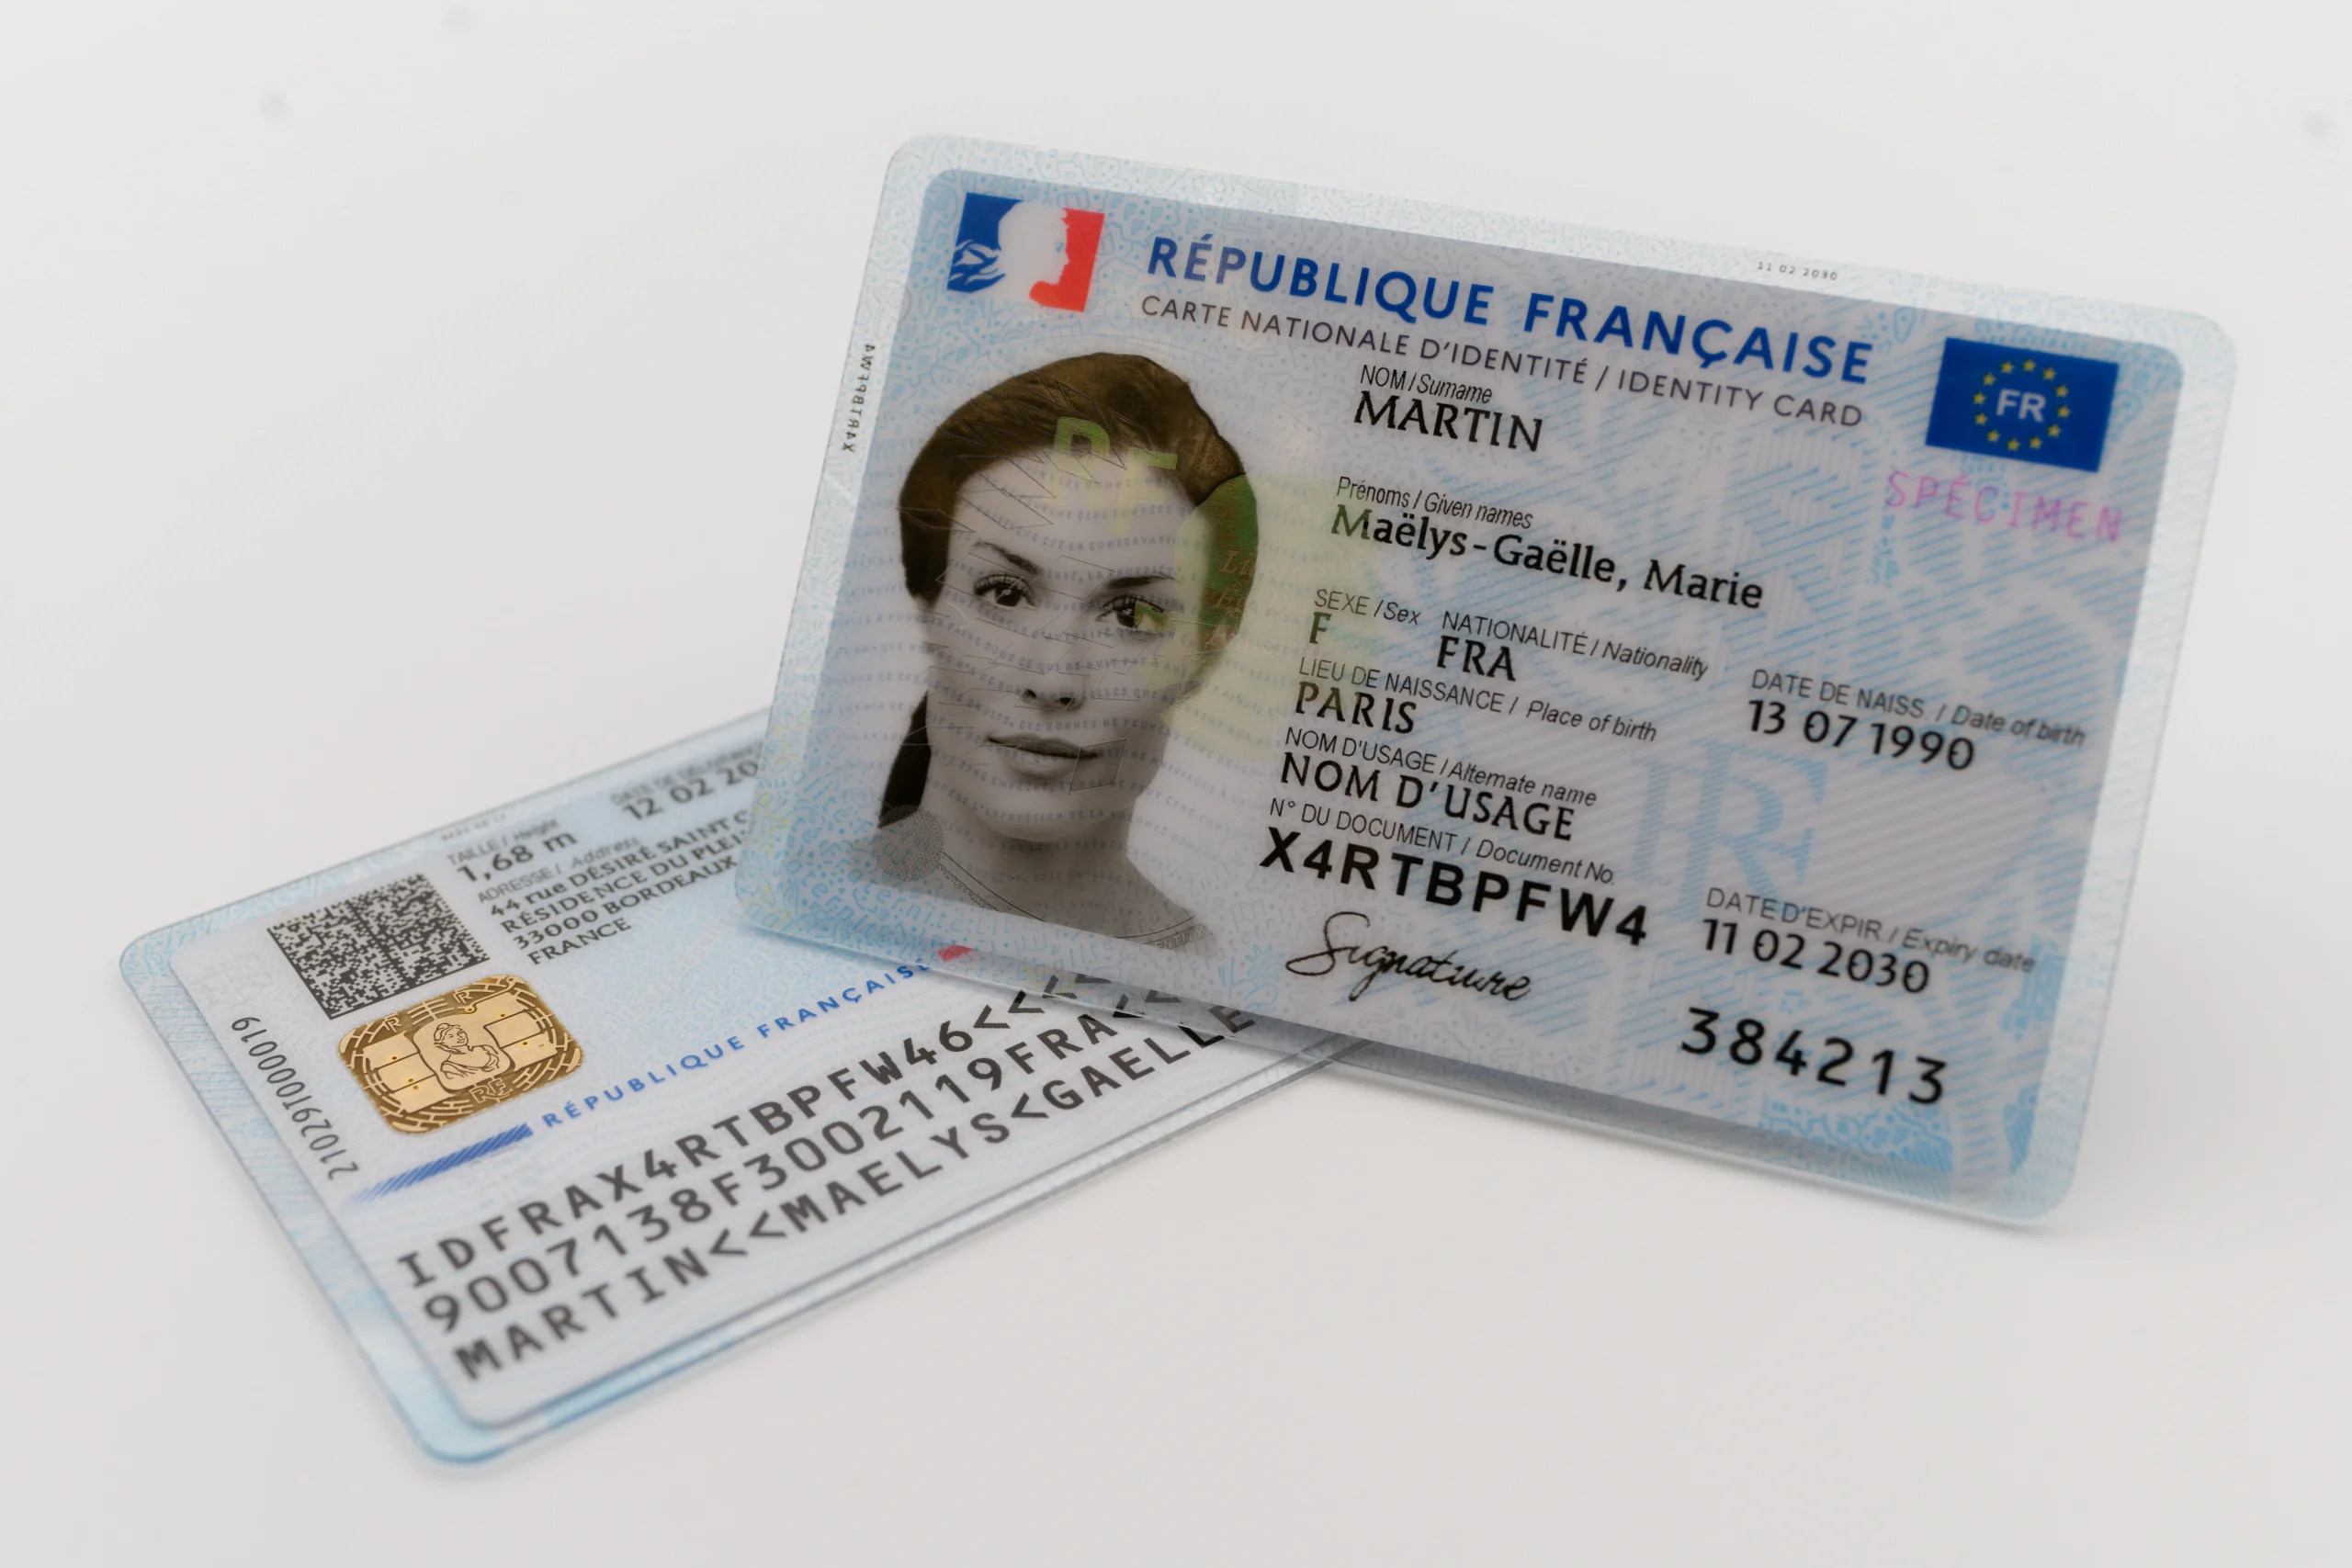 the-new-french-national-identity-card-is-awarded-the-prize-for-the-best